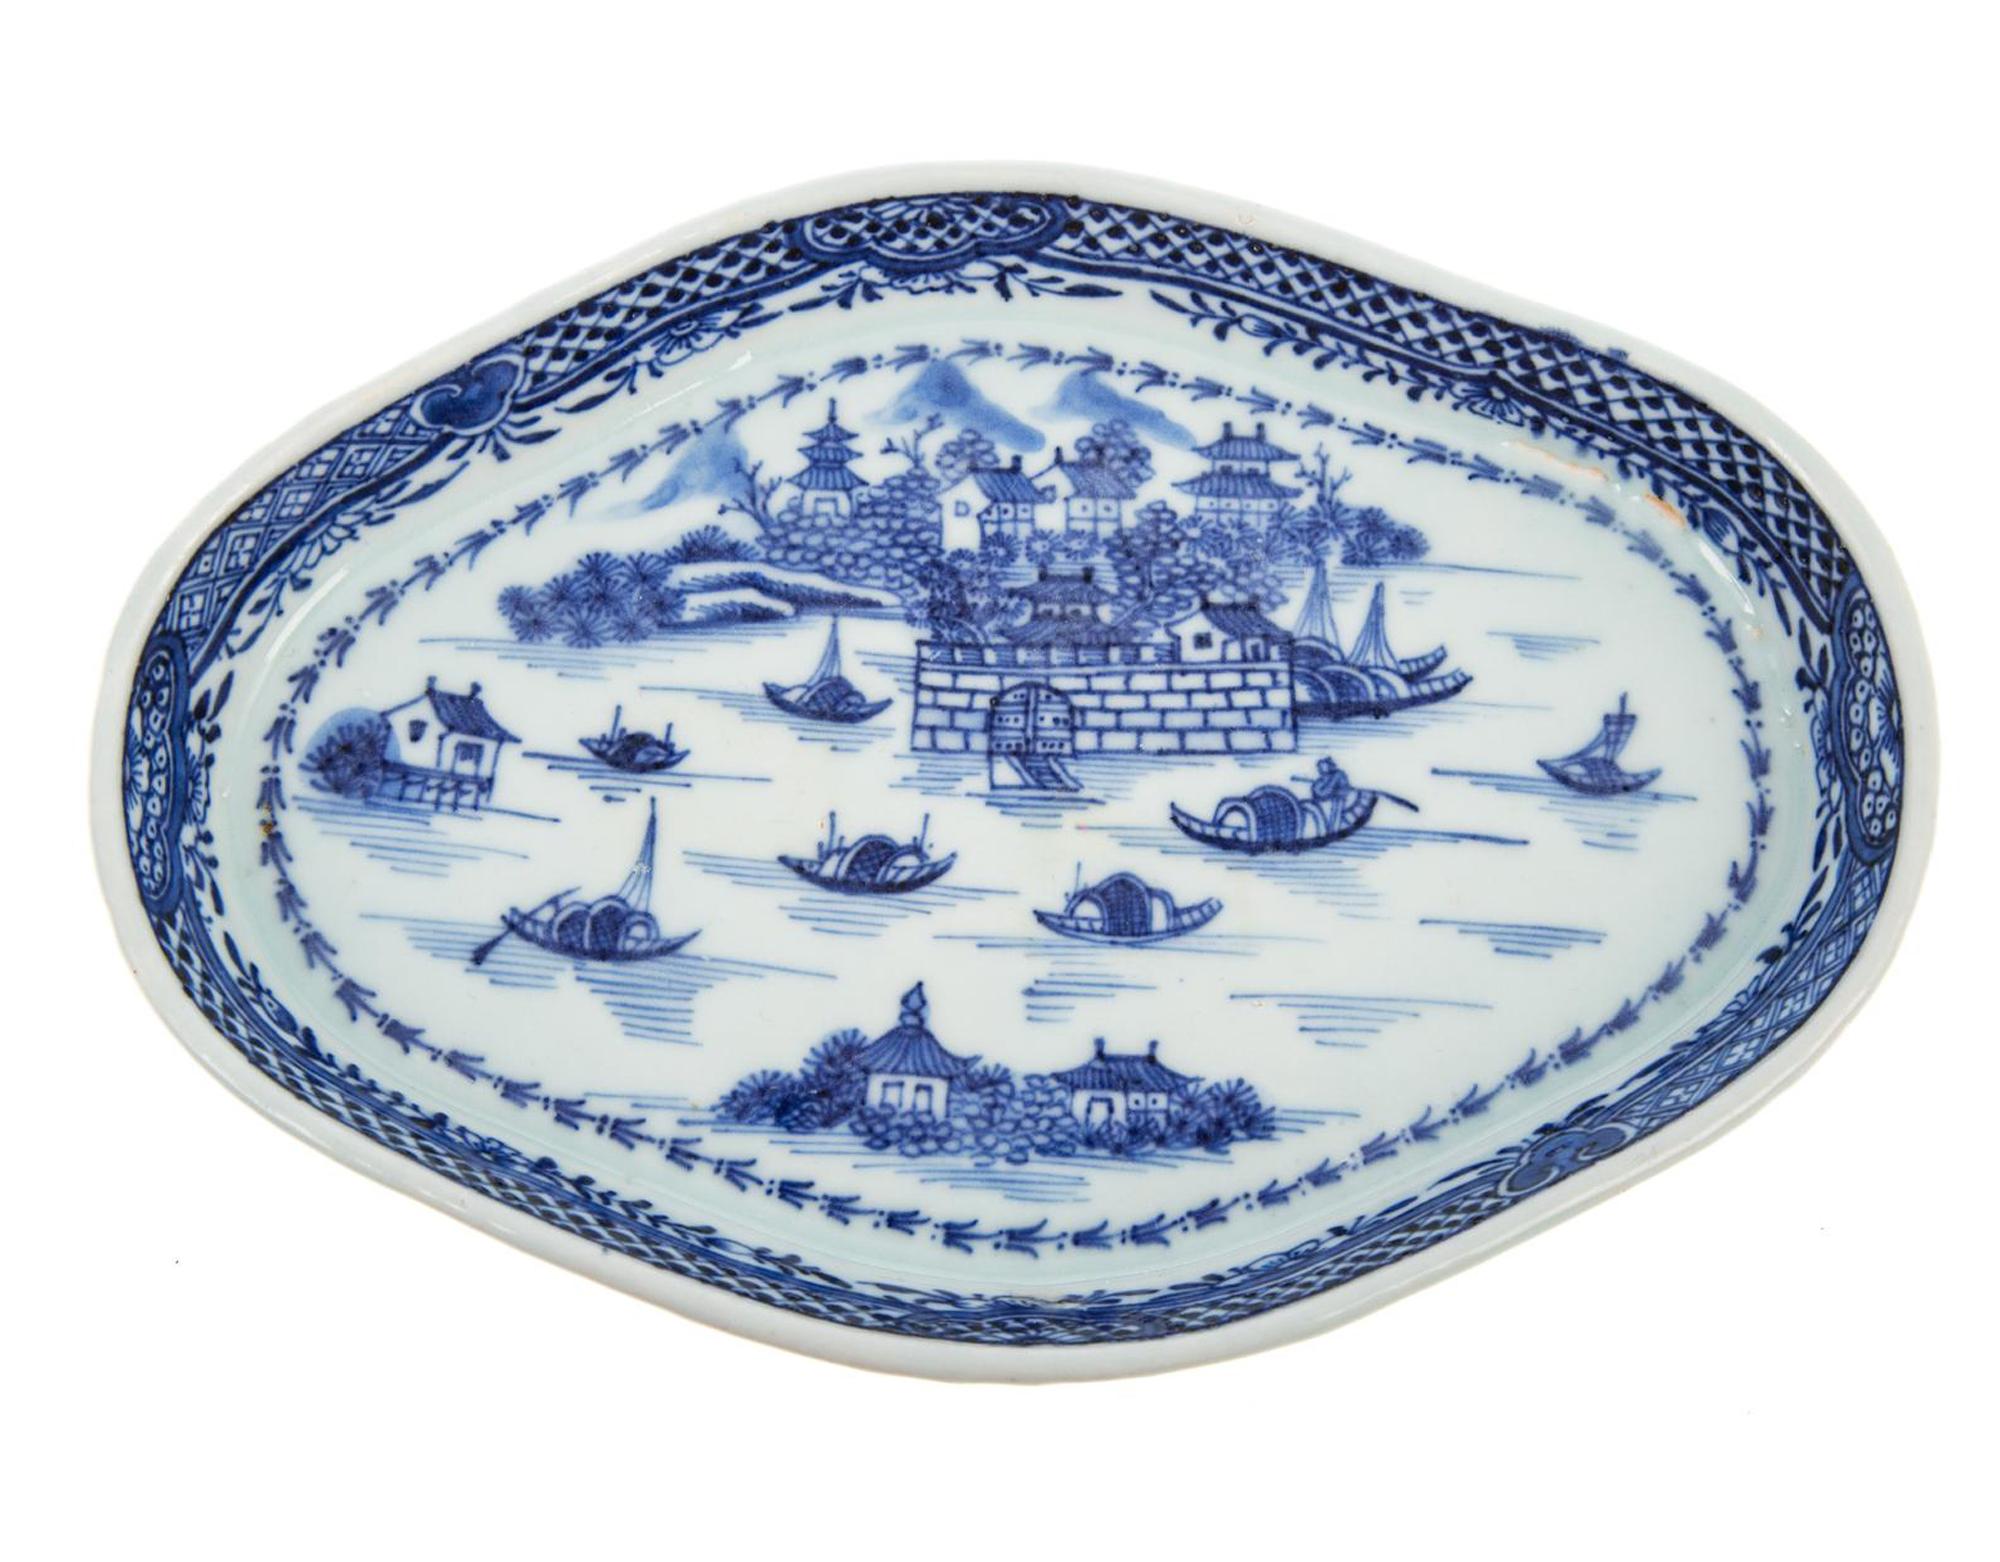 Chinese Export Porcelain blue & white spoon tray with the Dutch folly fort,
circa 1775

The rare Chinese Export blue and white quatrefoil dish depicts the Dutch folly fort in the Canton River.

The porcelain dish is painted in underglaze blue